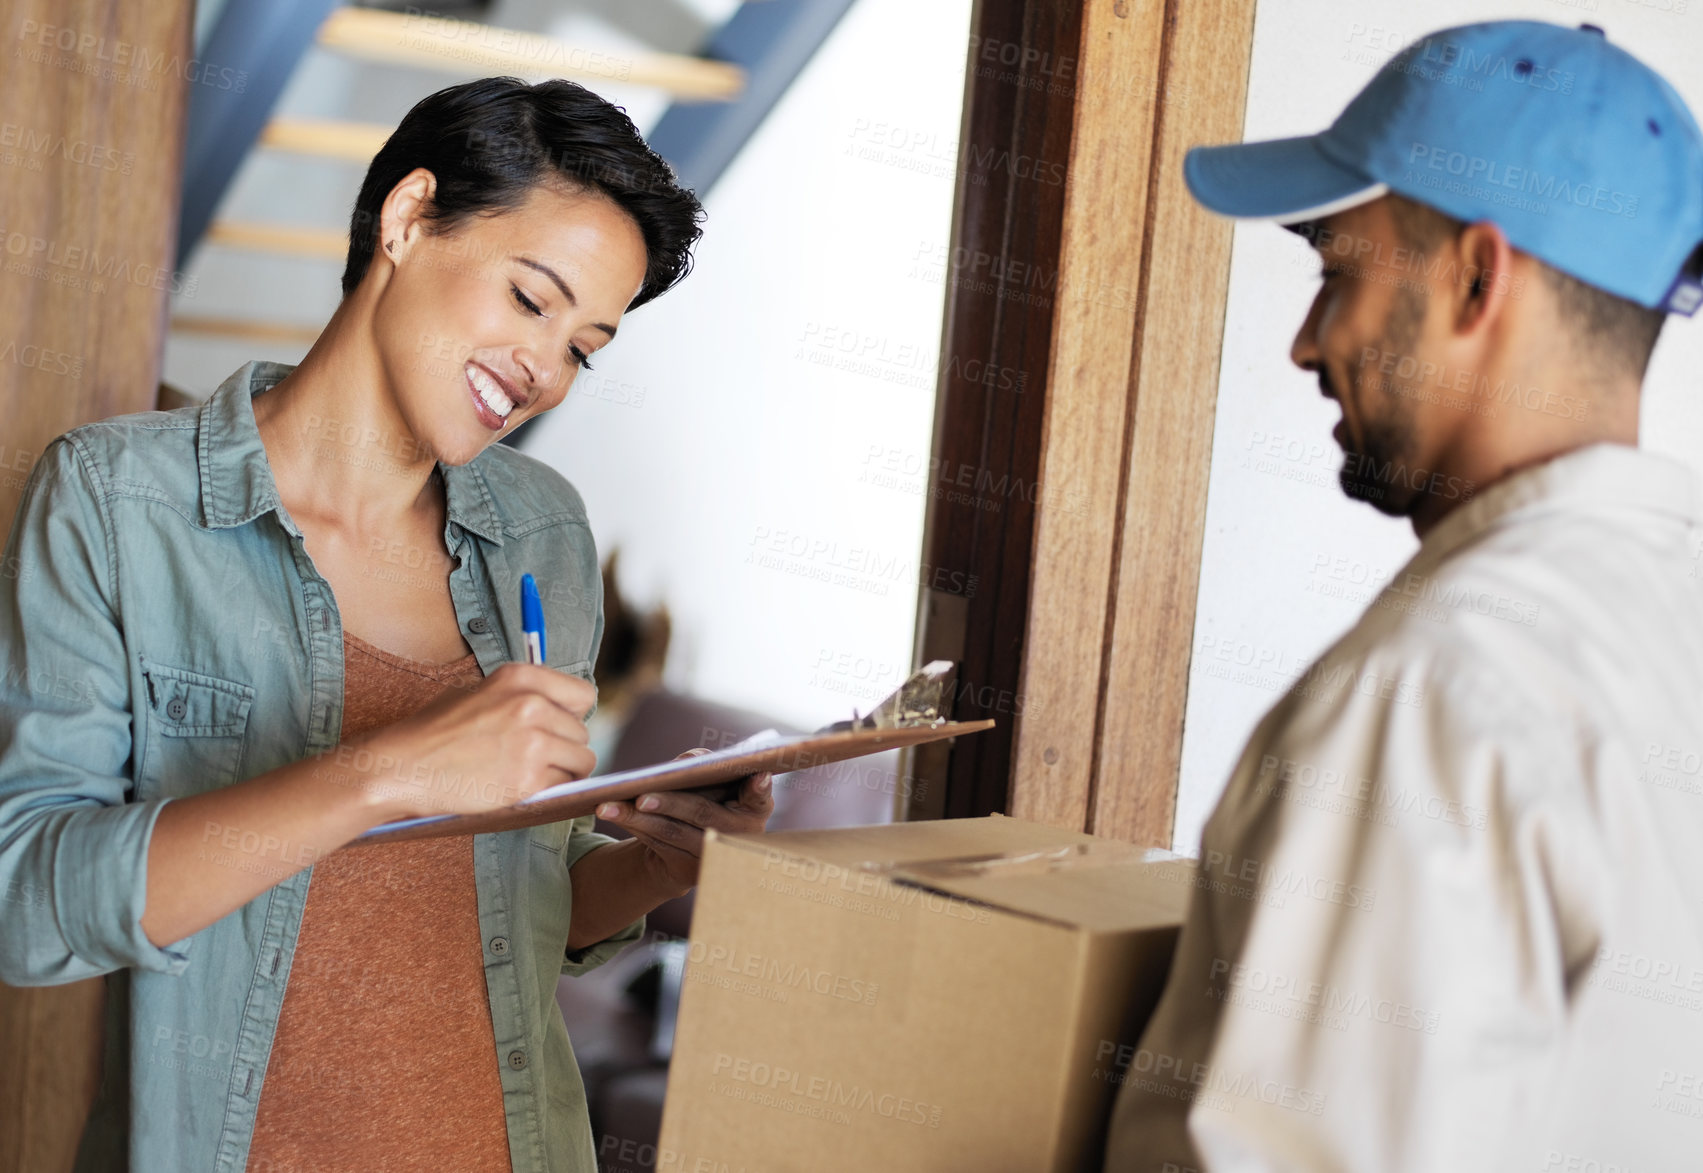 Buy stock photo Shot of a young woman standing at her front door signing for a package from a courier